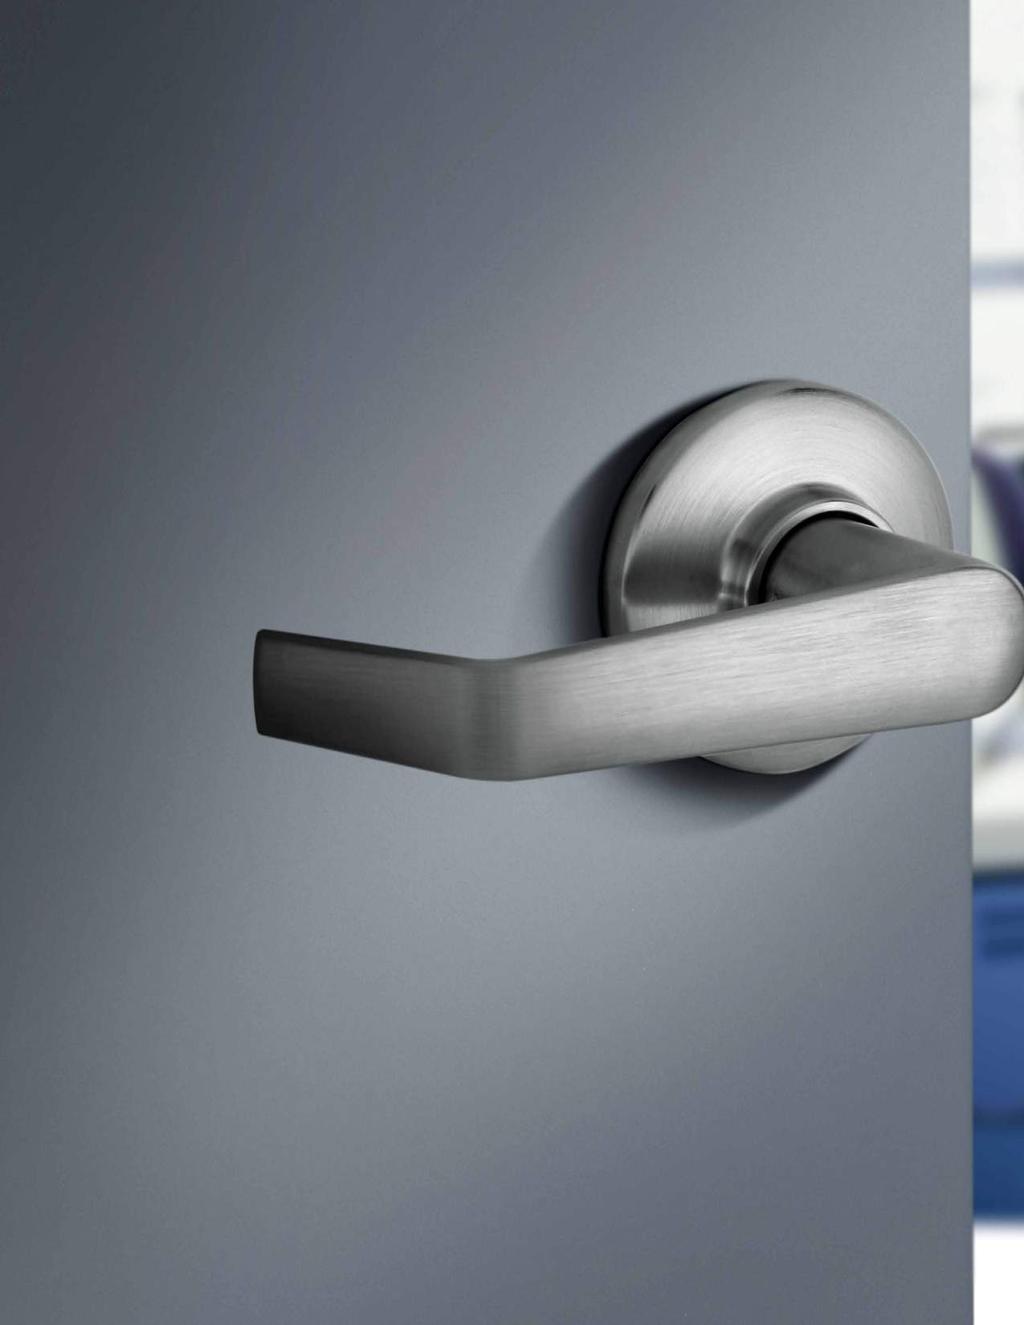 Put your trust in the name you know For more than 90 years, Schlage has been creating the strongest and most technologically advanced security products for schools, hospitals, hotels, commercial and